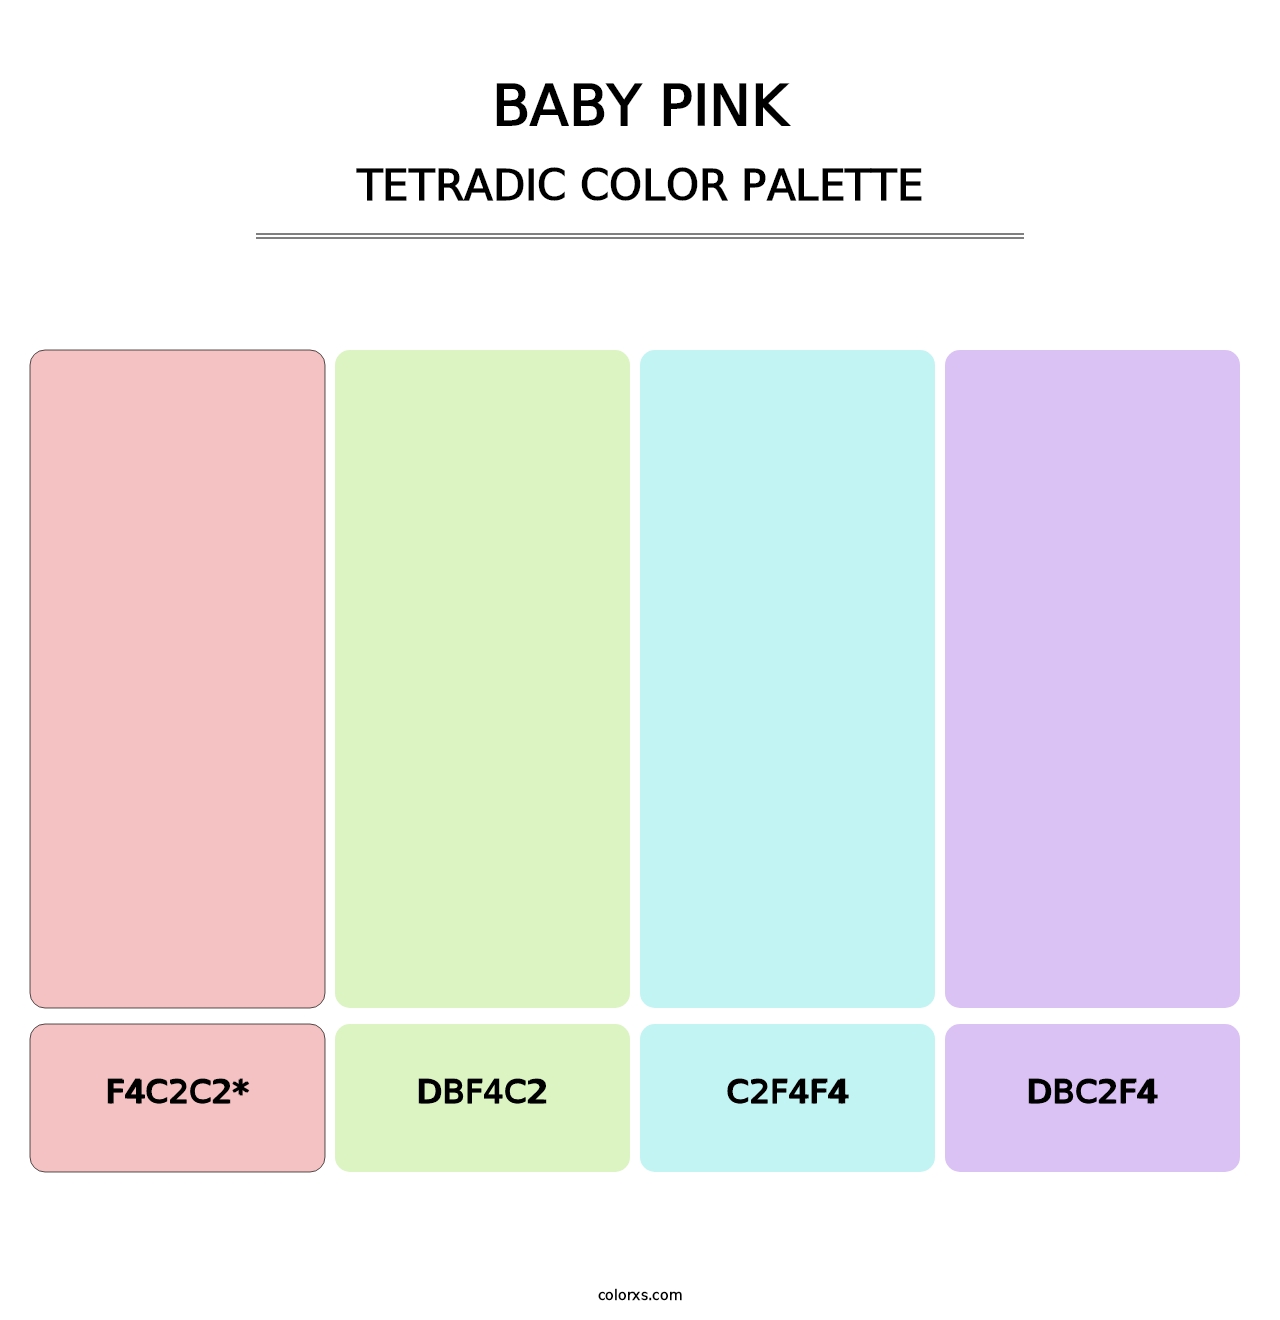 Baby Pink - Tetradic Color Palette